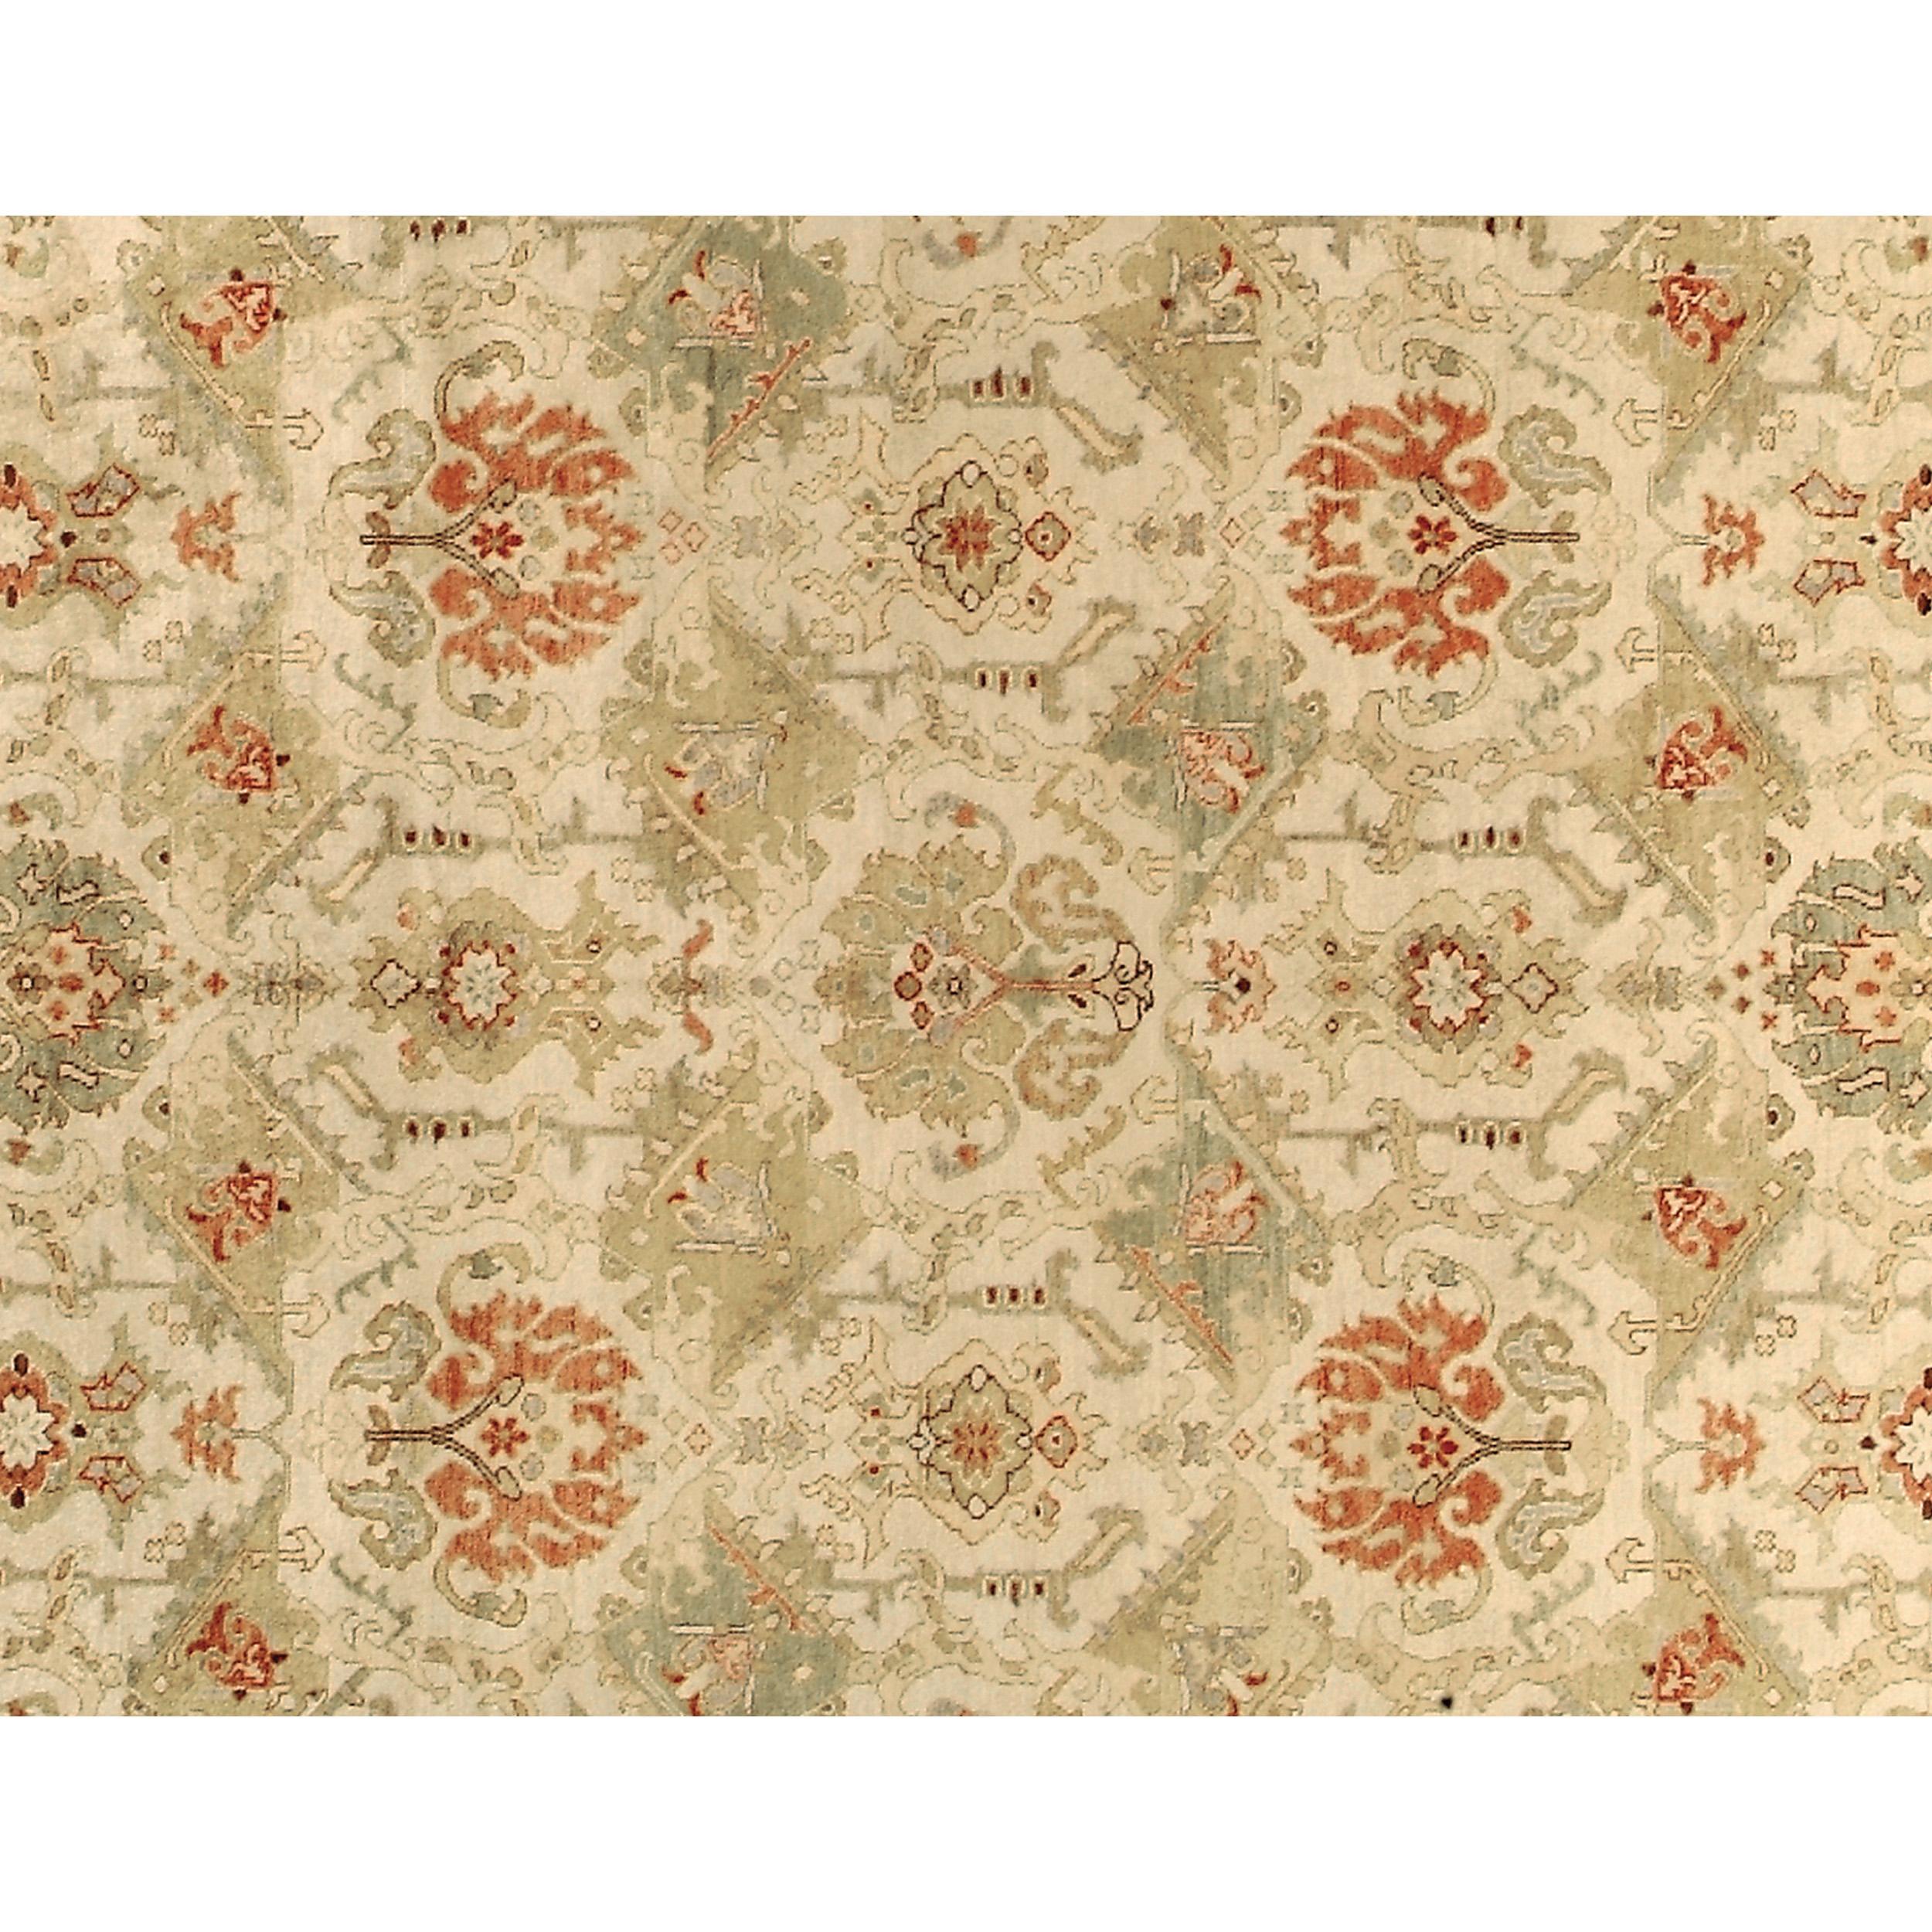 Agra Luxury Traditional Hand-Knotted Mahal Cream and Saffron 16x28 Rug For Sale